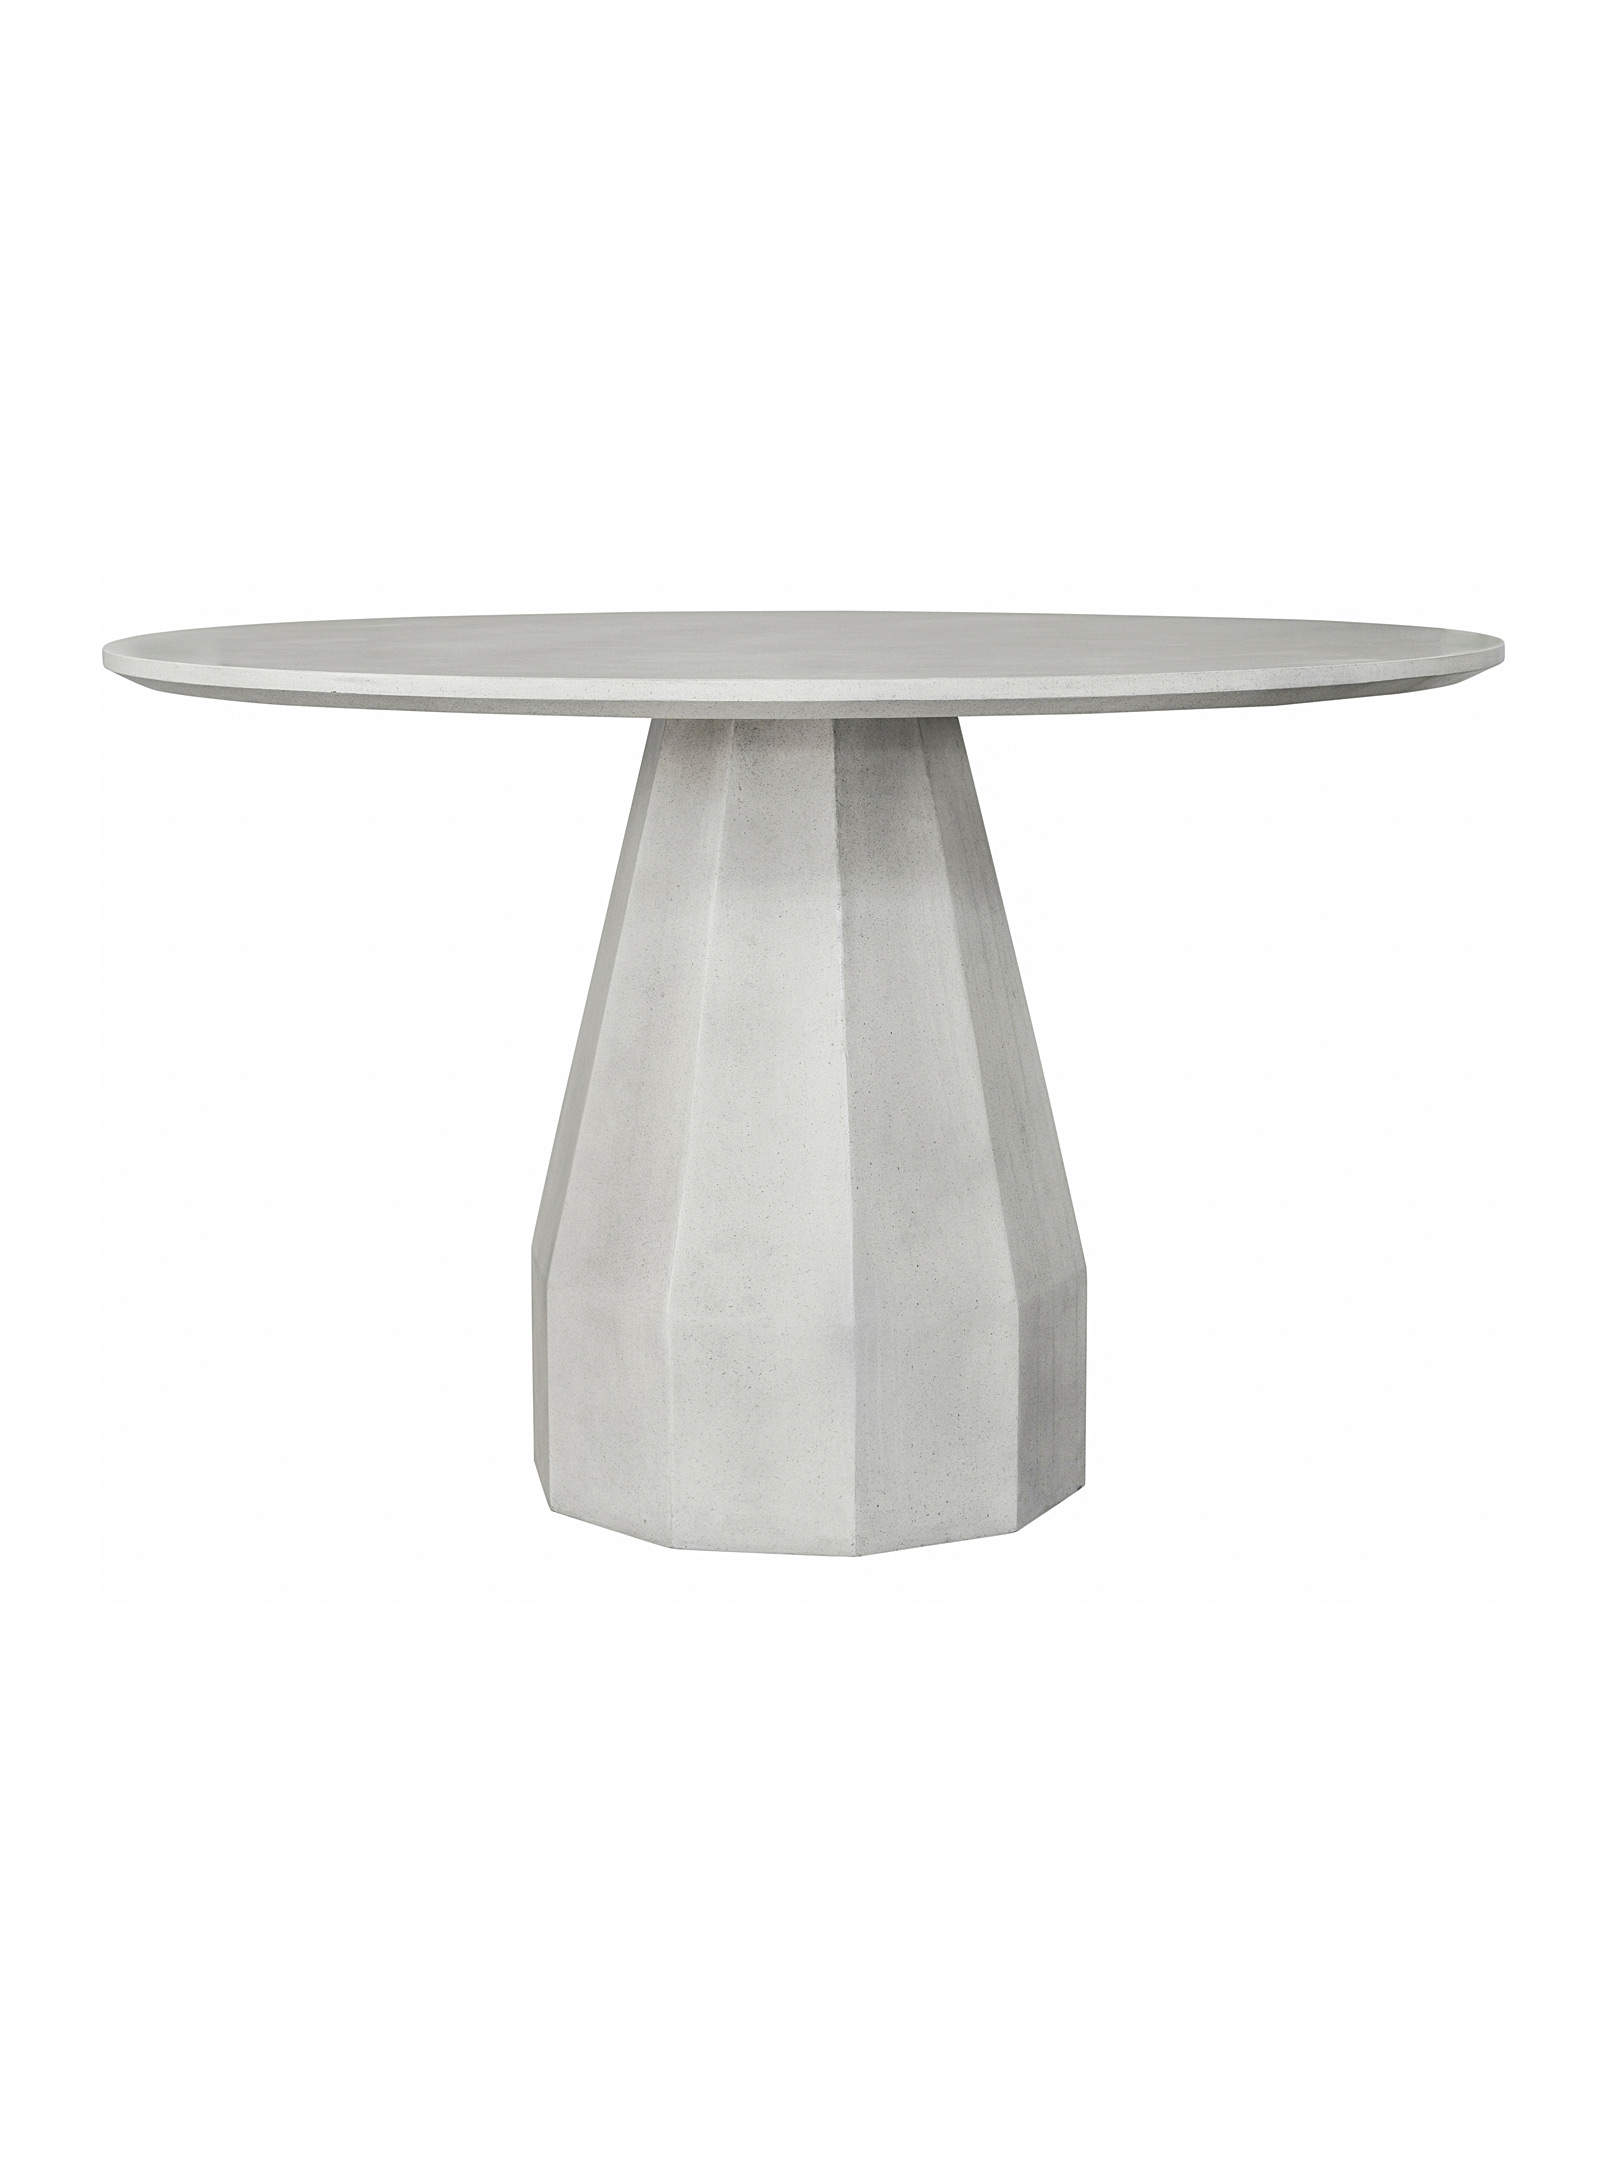 Moe's Home Collection - Templo antique concrete dining table